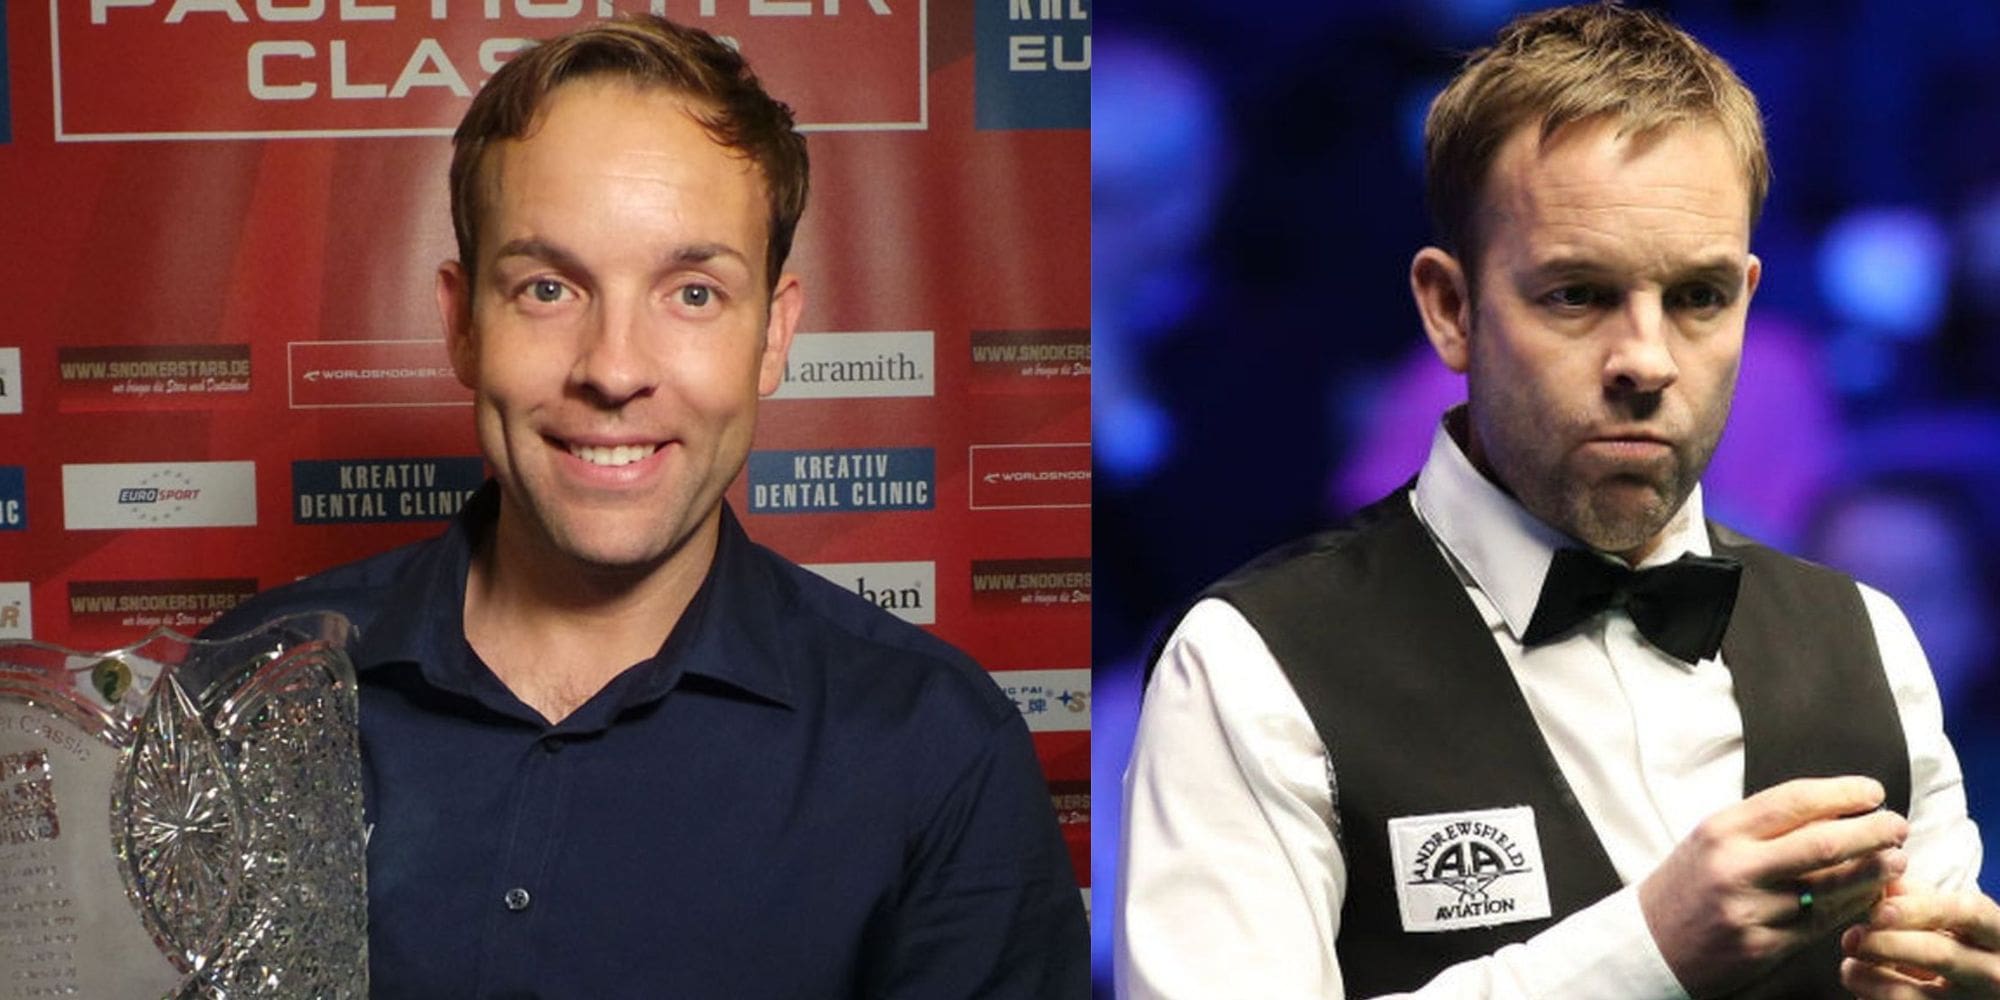 Ali Carter's Net Worth and Career